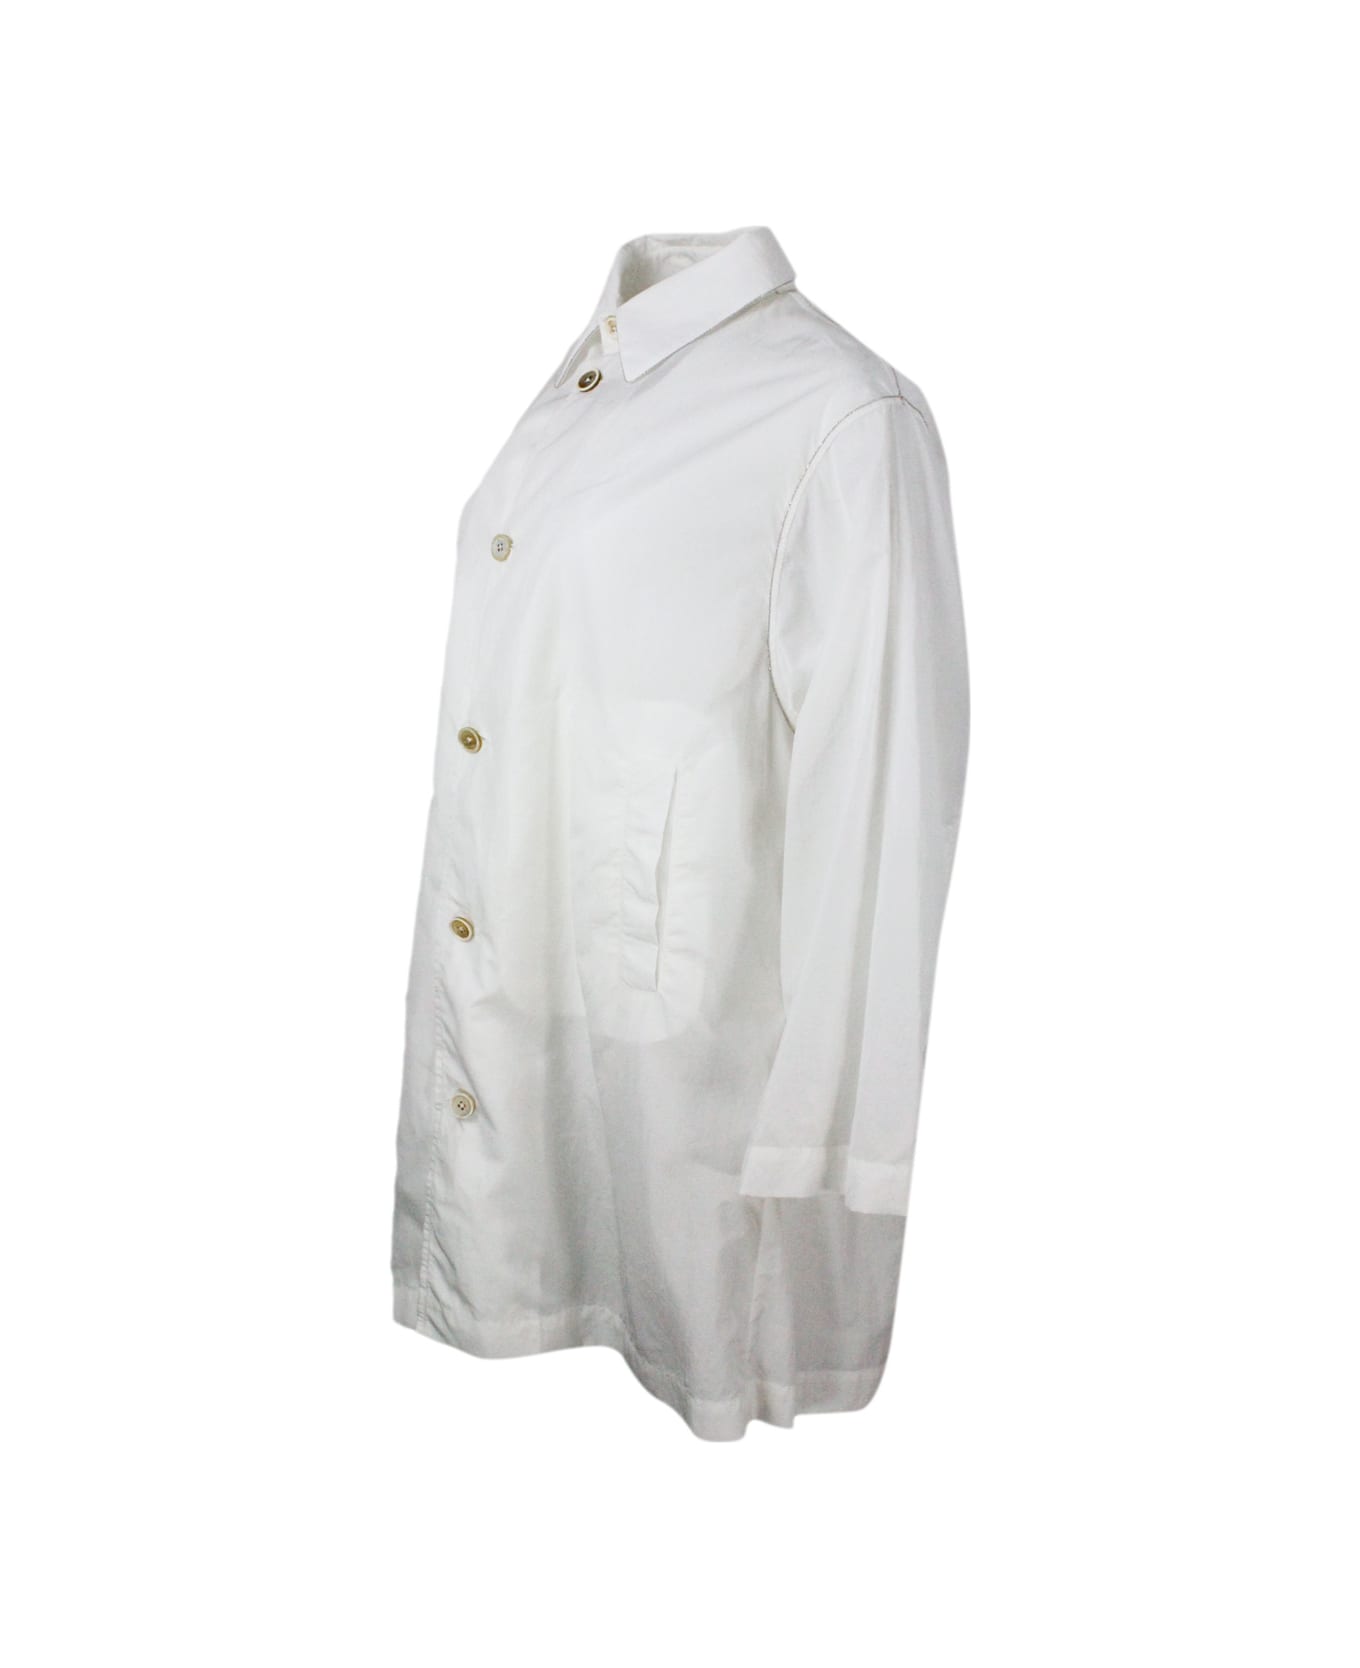 Fabiana Filippi Lightweight Nylon Windproof Outerware With Collar And Button Closure Embellished With Rows Of Brilliant Monili - White